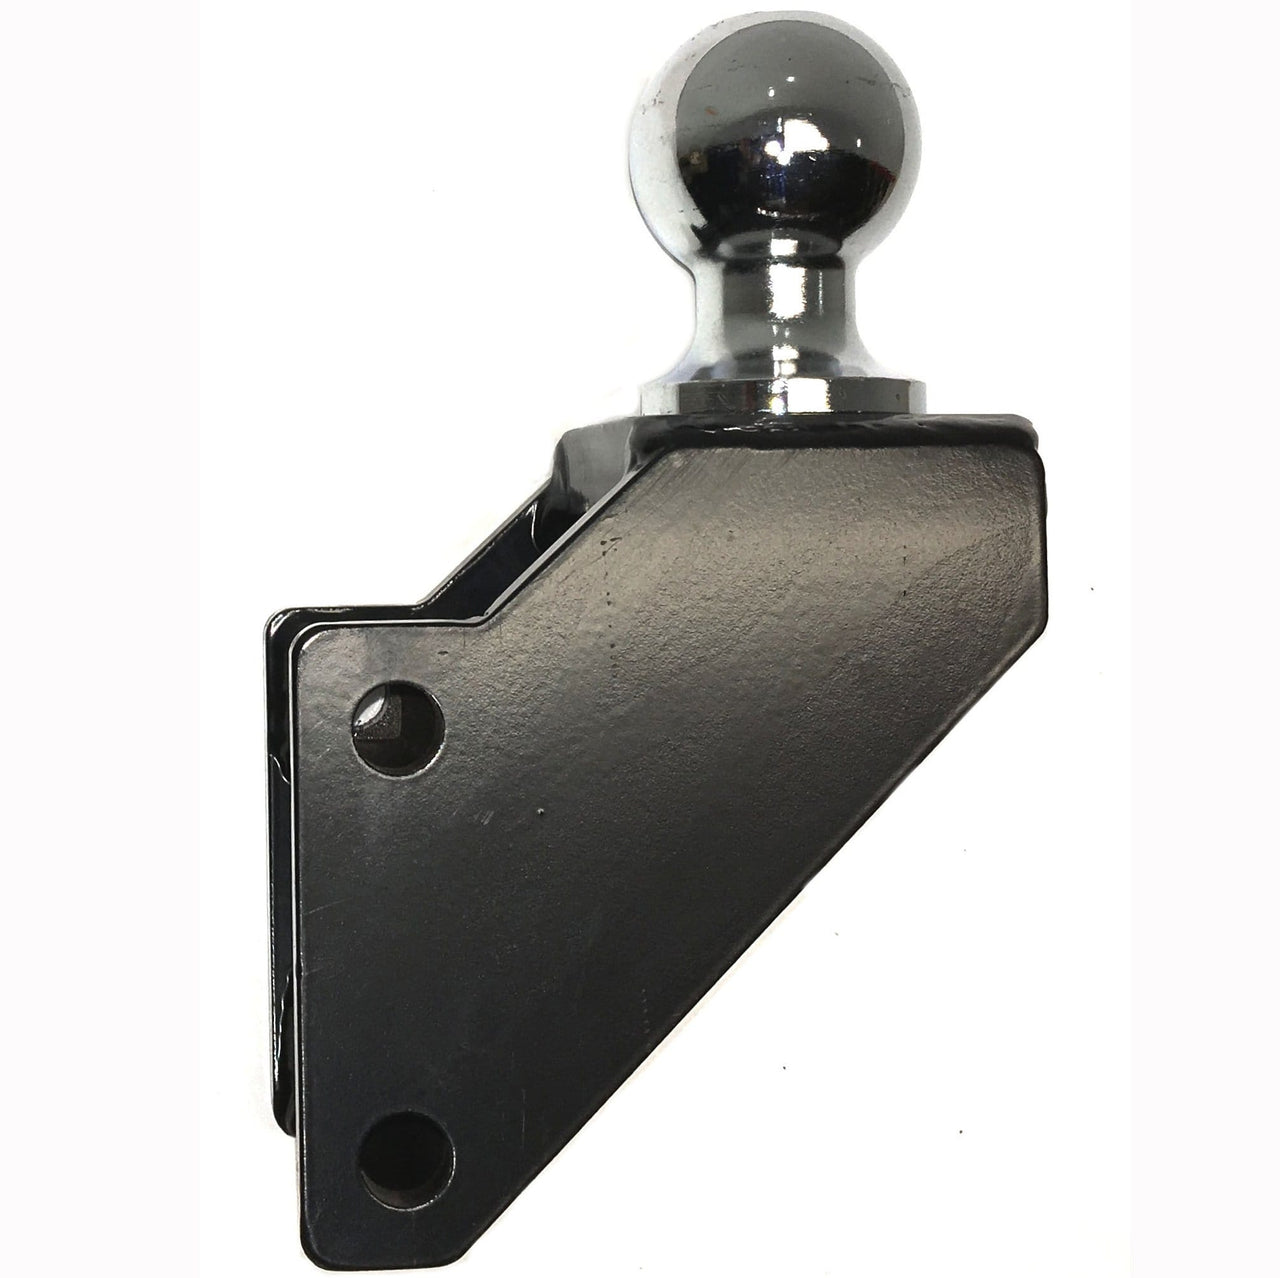 Shocker Raised Ball Mount Attachment +2" rise to -1" drop